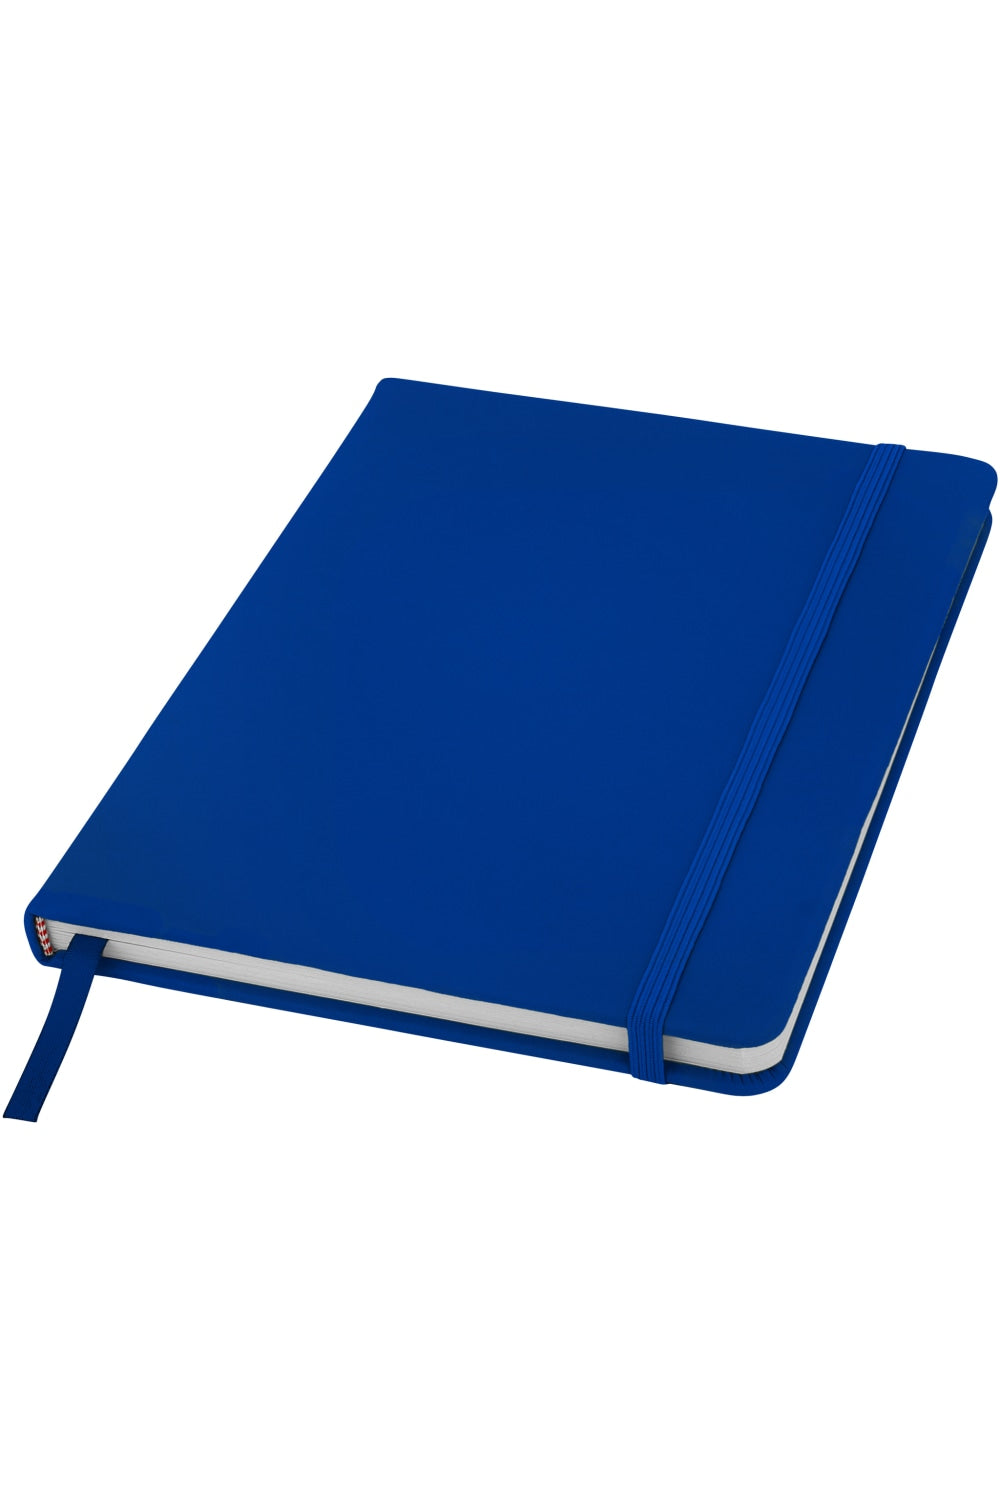 Bullet Spectrum A5 Notebook - Blank Pages (Pack of 2) (Royal Blue) (8.3 x 5.5 x 0.5 inches)